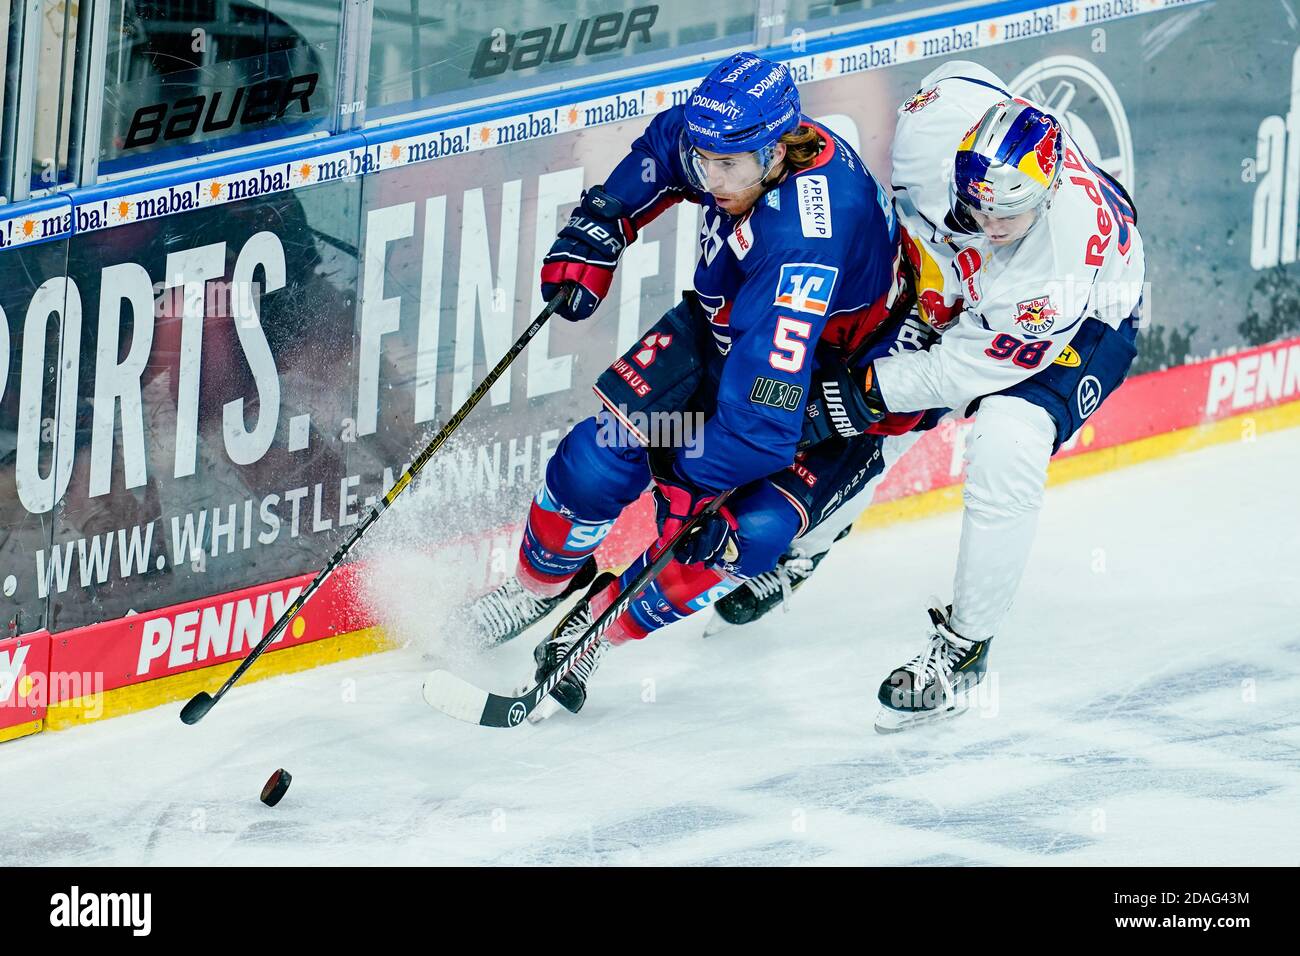 Mannheim, Germany. 12th Nov, 2020. Ice hockey: Magenta Sport Cup, Adler Mannheim - EHC Red Bull Munich, preliminary round, Group B, 1st day of play, SAP Arena. Mannheim's Björn Krupp (l) and Munich's Bastian Eckl fight for the puck. Credit: Uwe Anspach/dpa/Alamy Live News Stock Photo